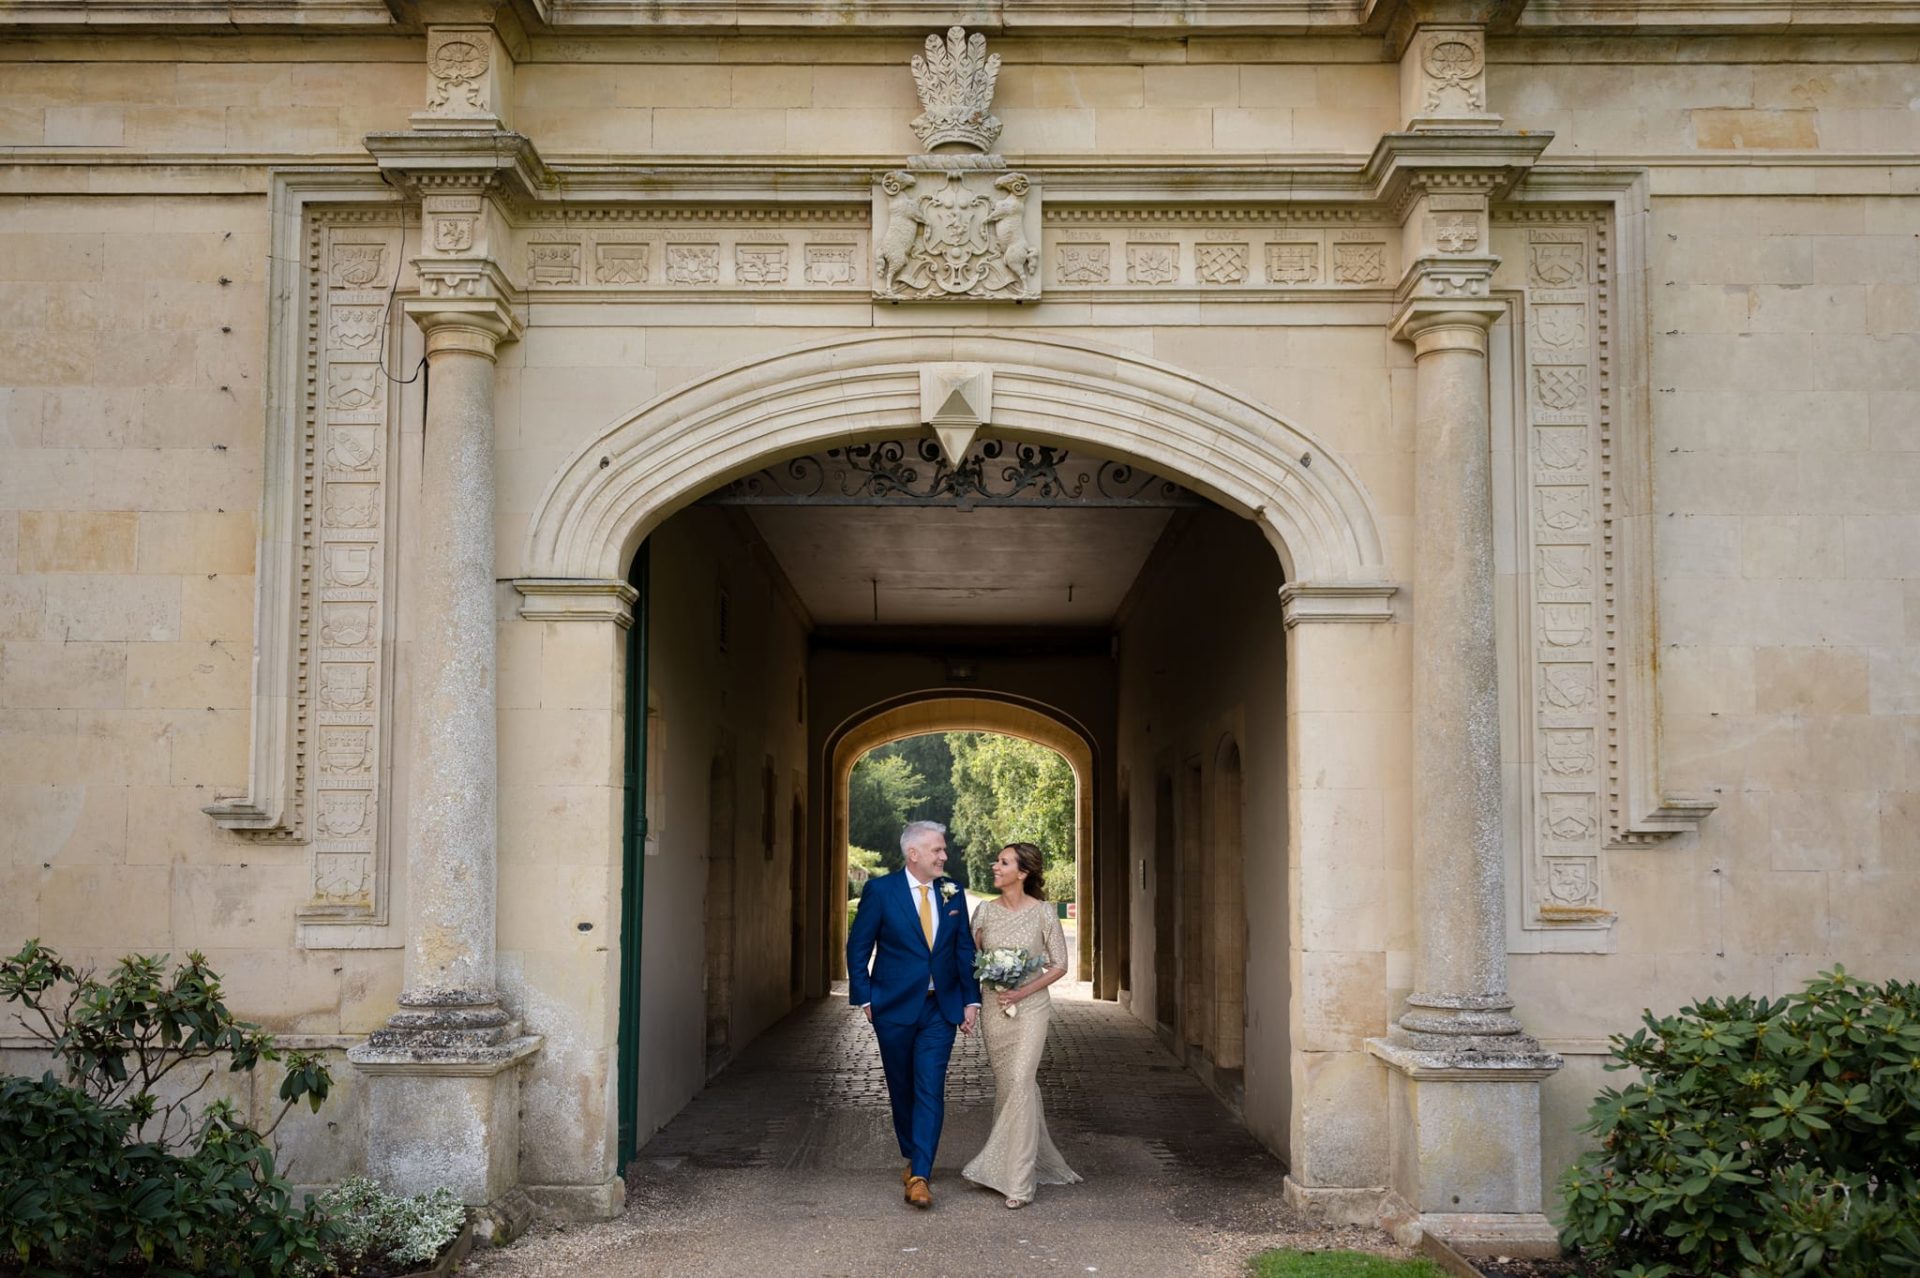 Couple walking under arch carved with decorative family crests